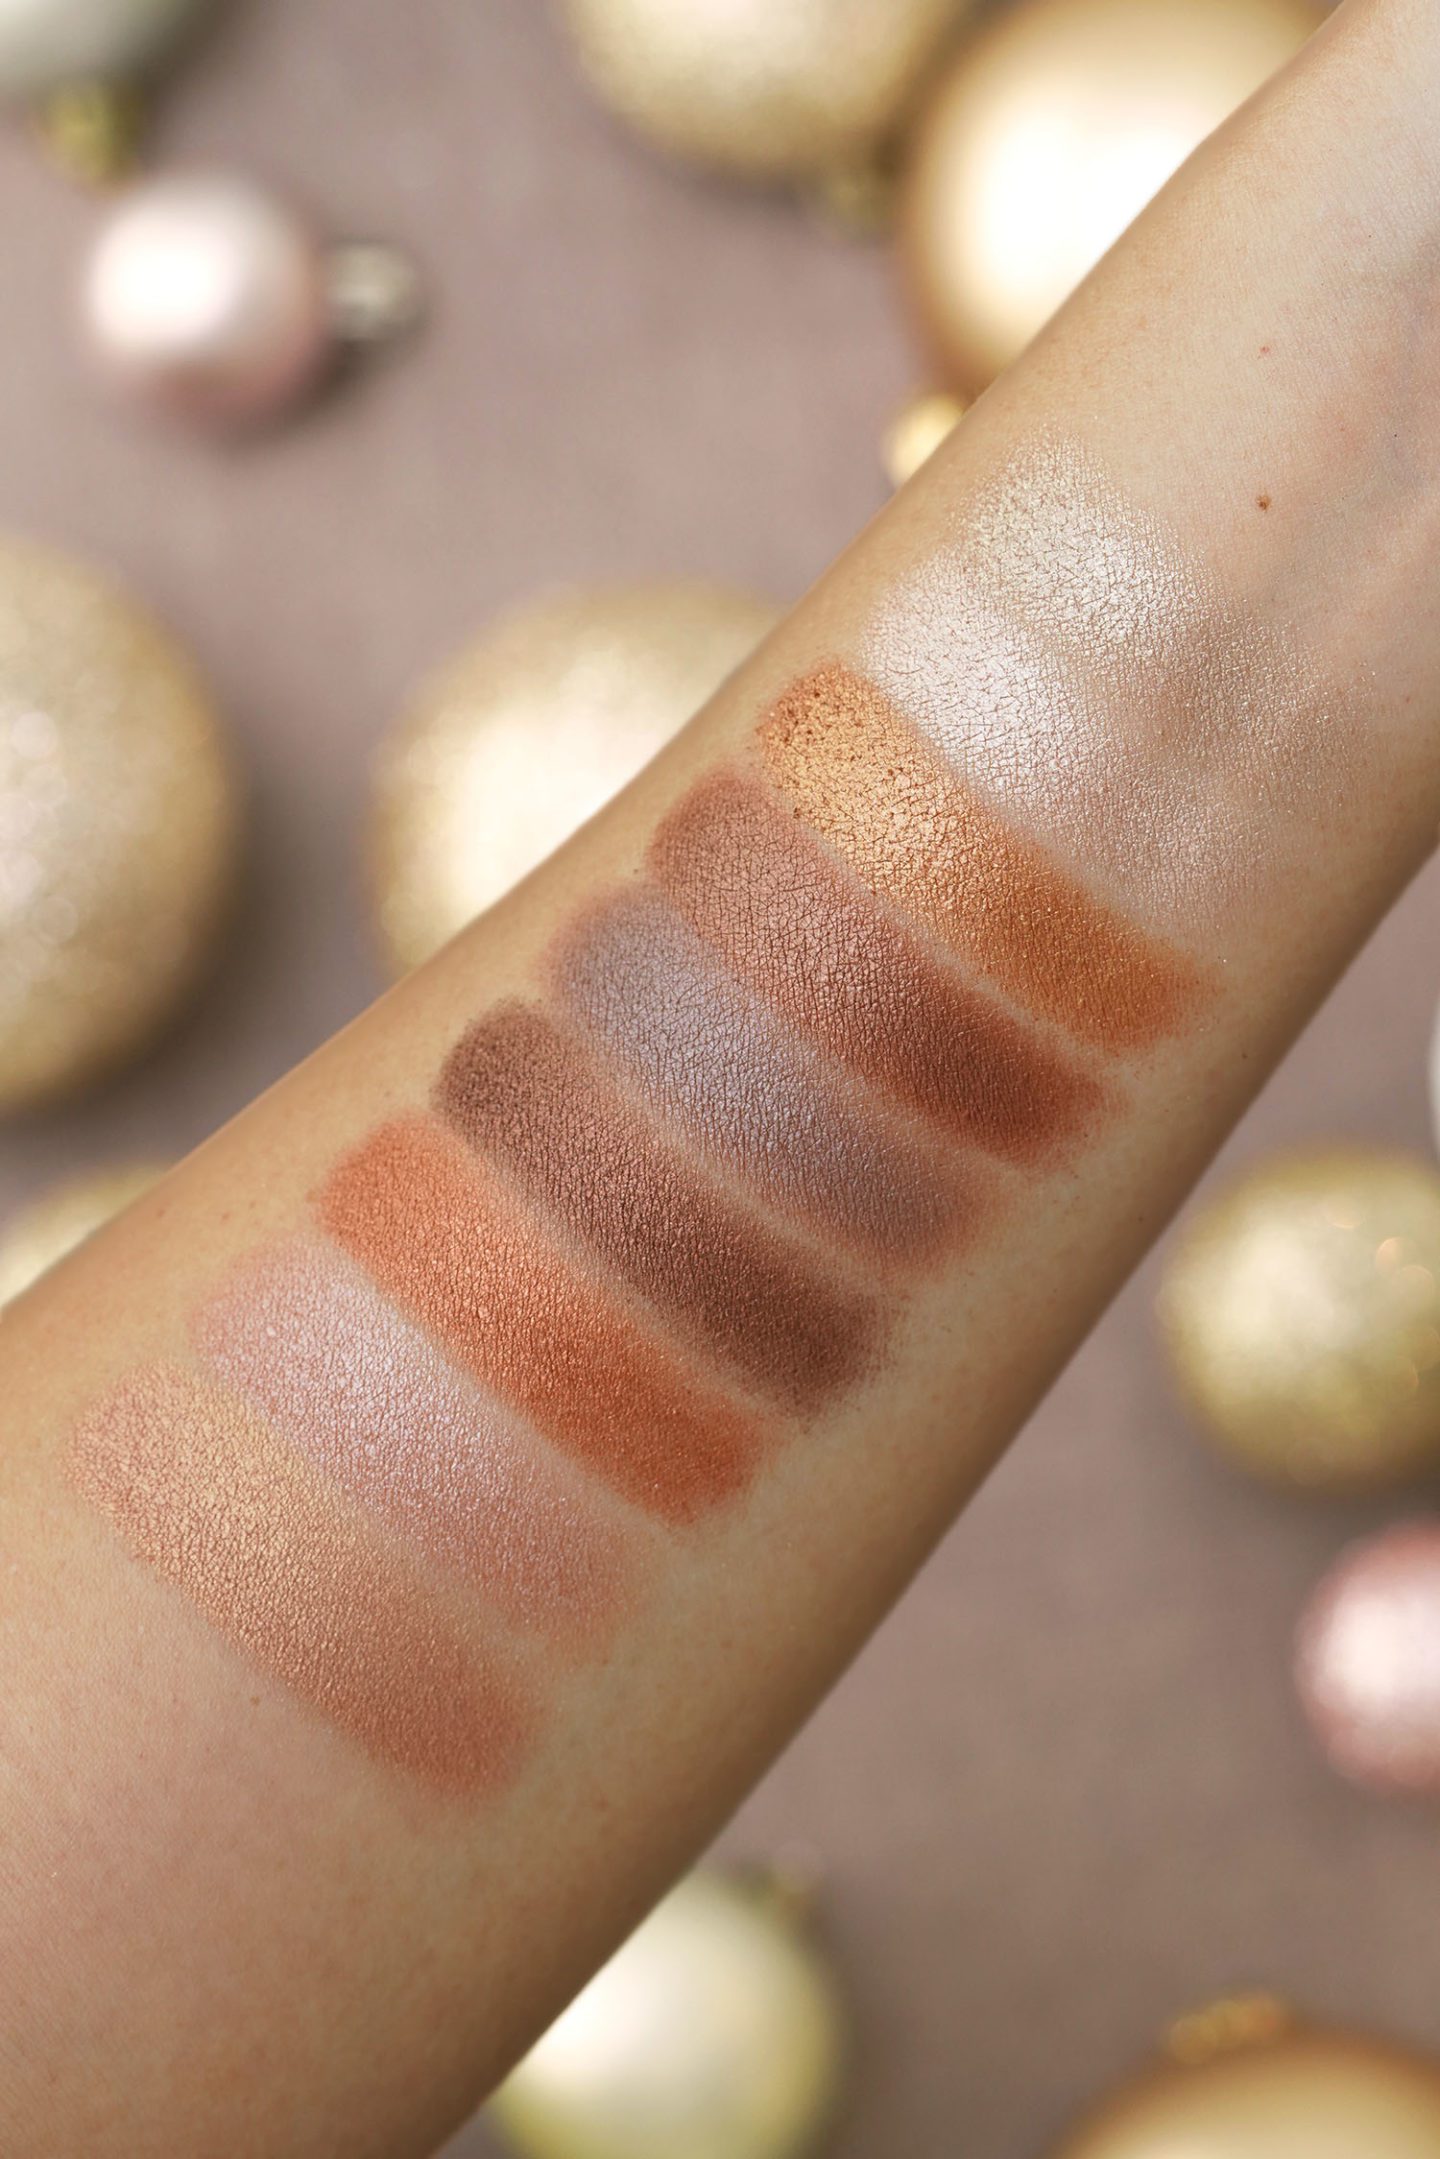 By Terry VIP Expert Bonjour Paris Palette swatches